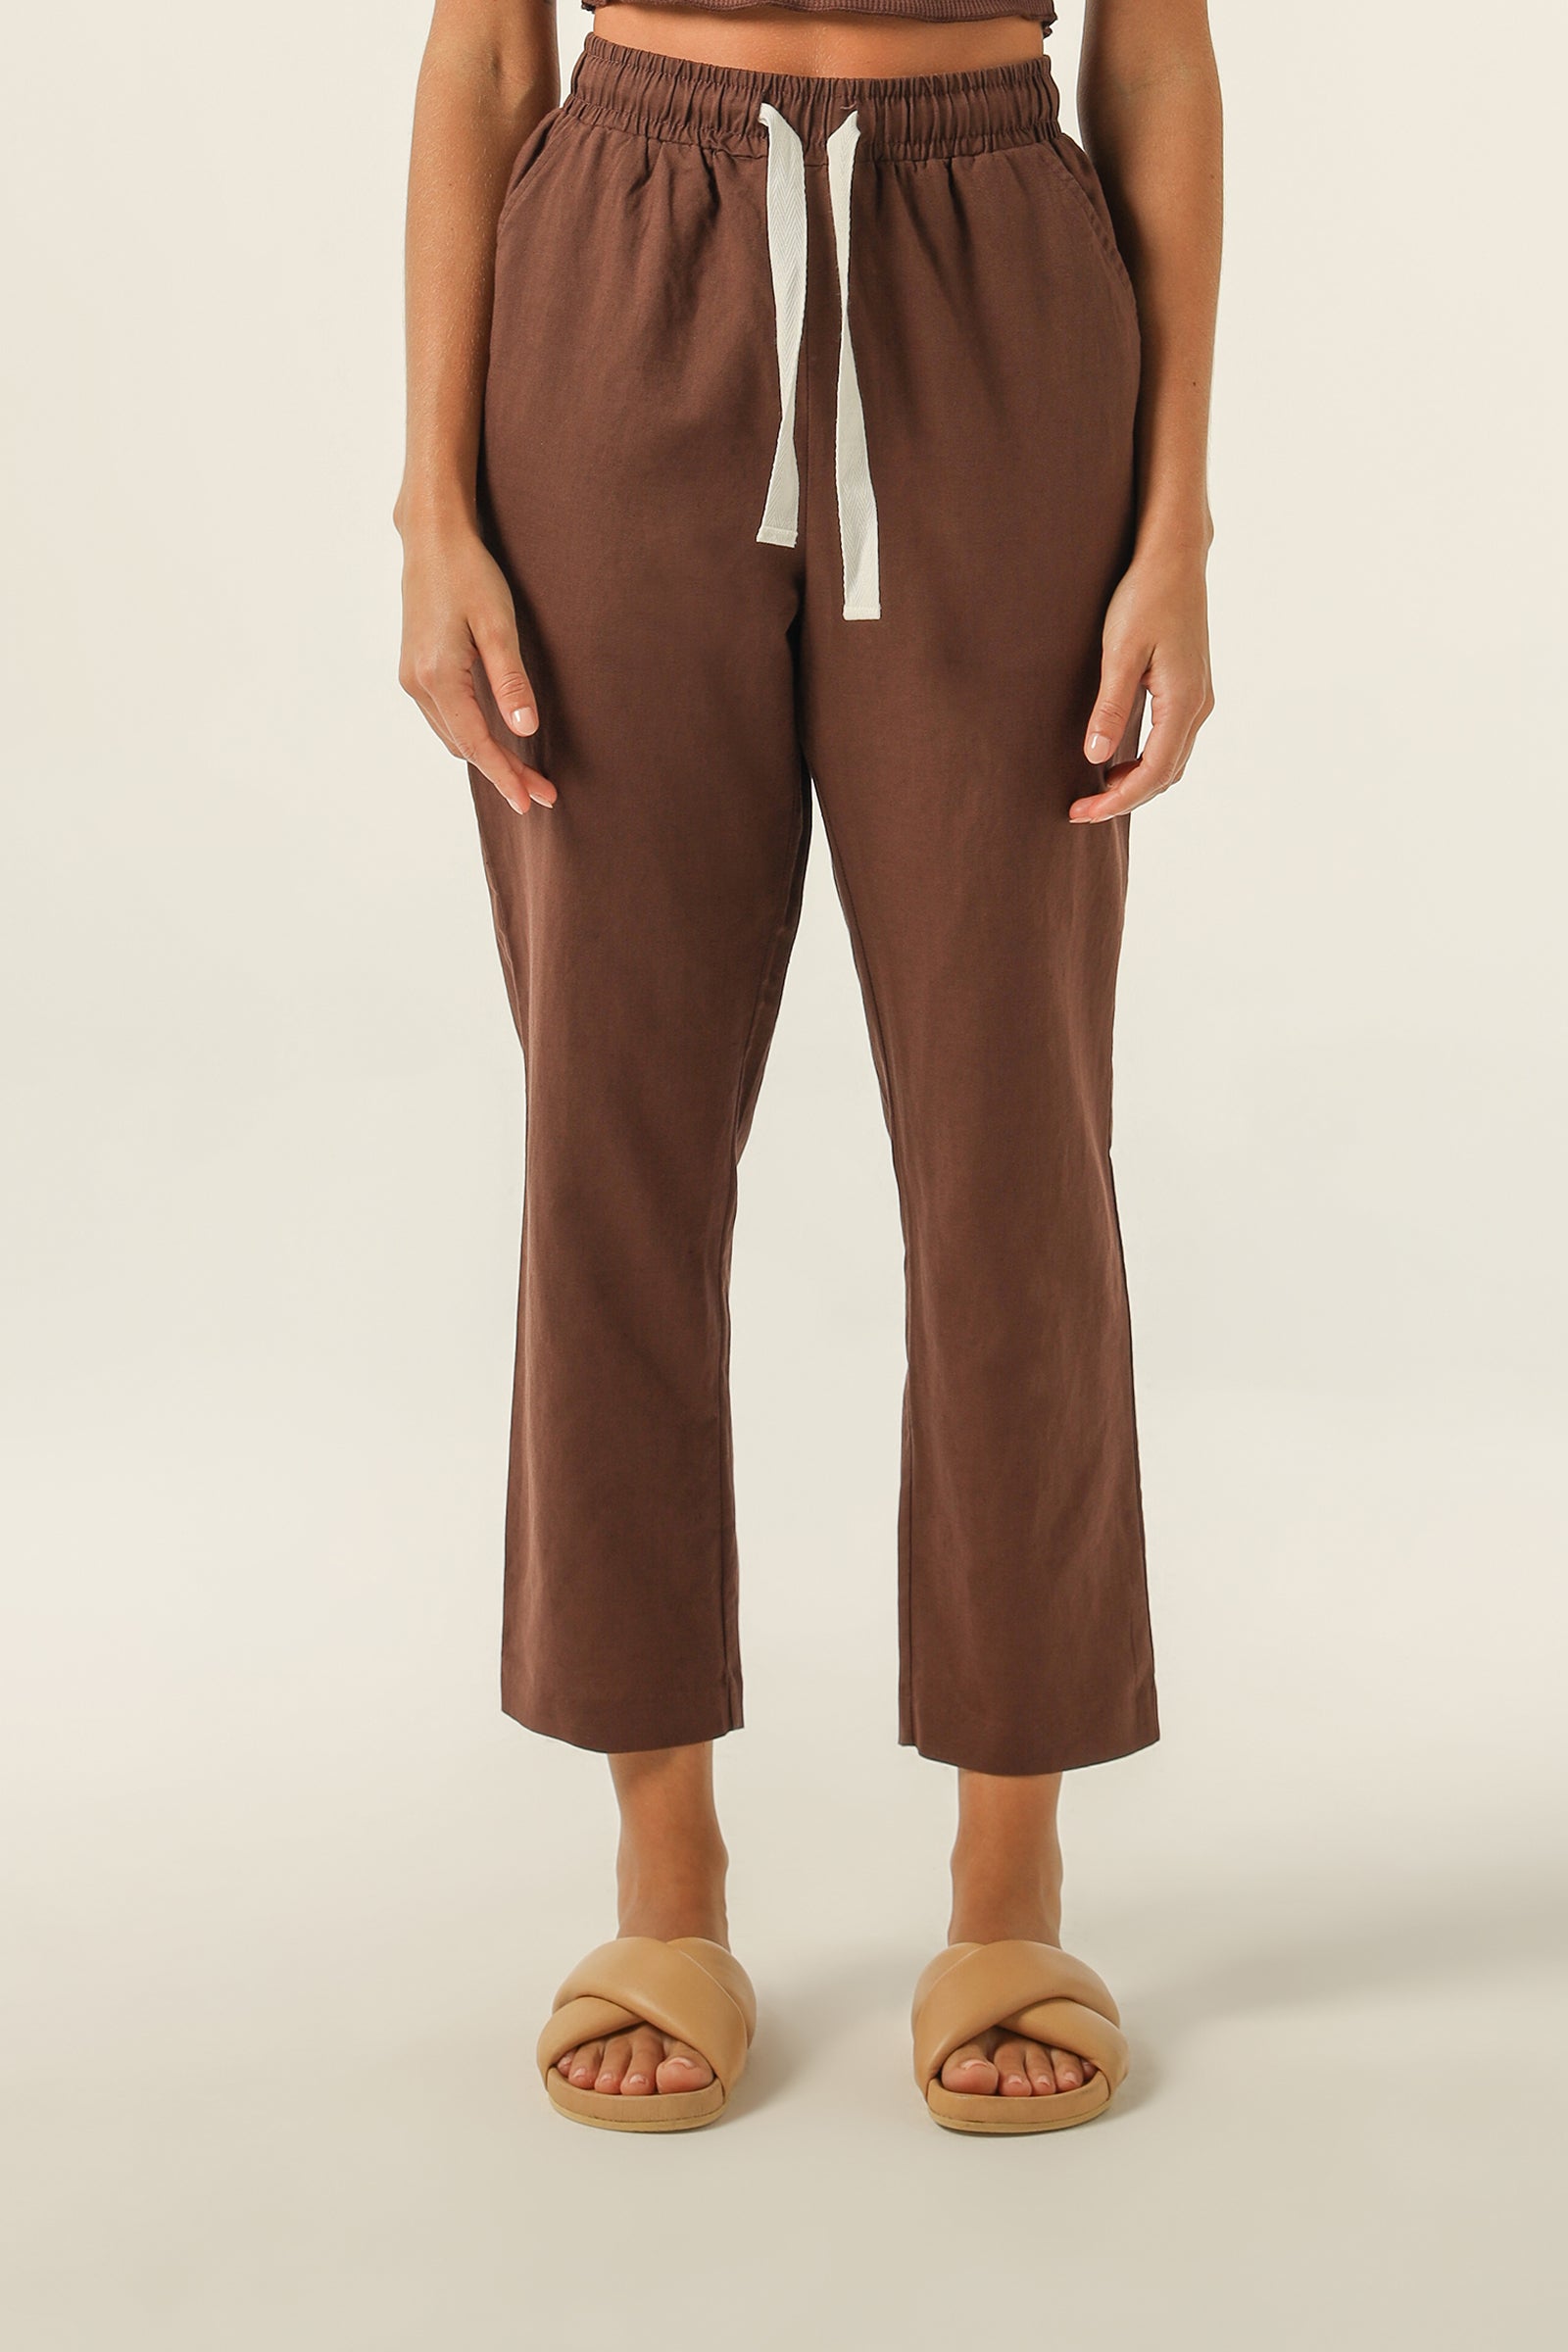 Nude Lucy Nude Classic Pant In a Brown Cedar Colour